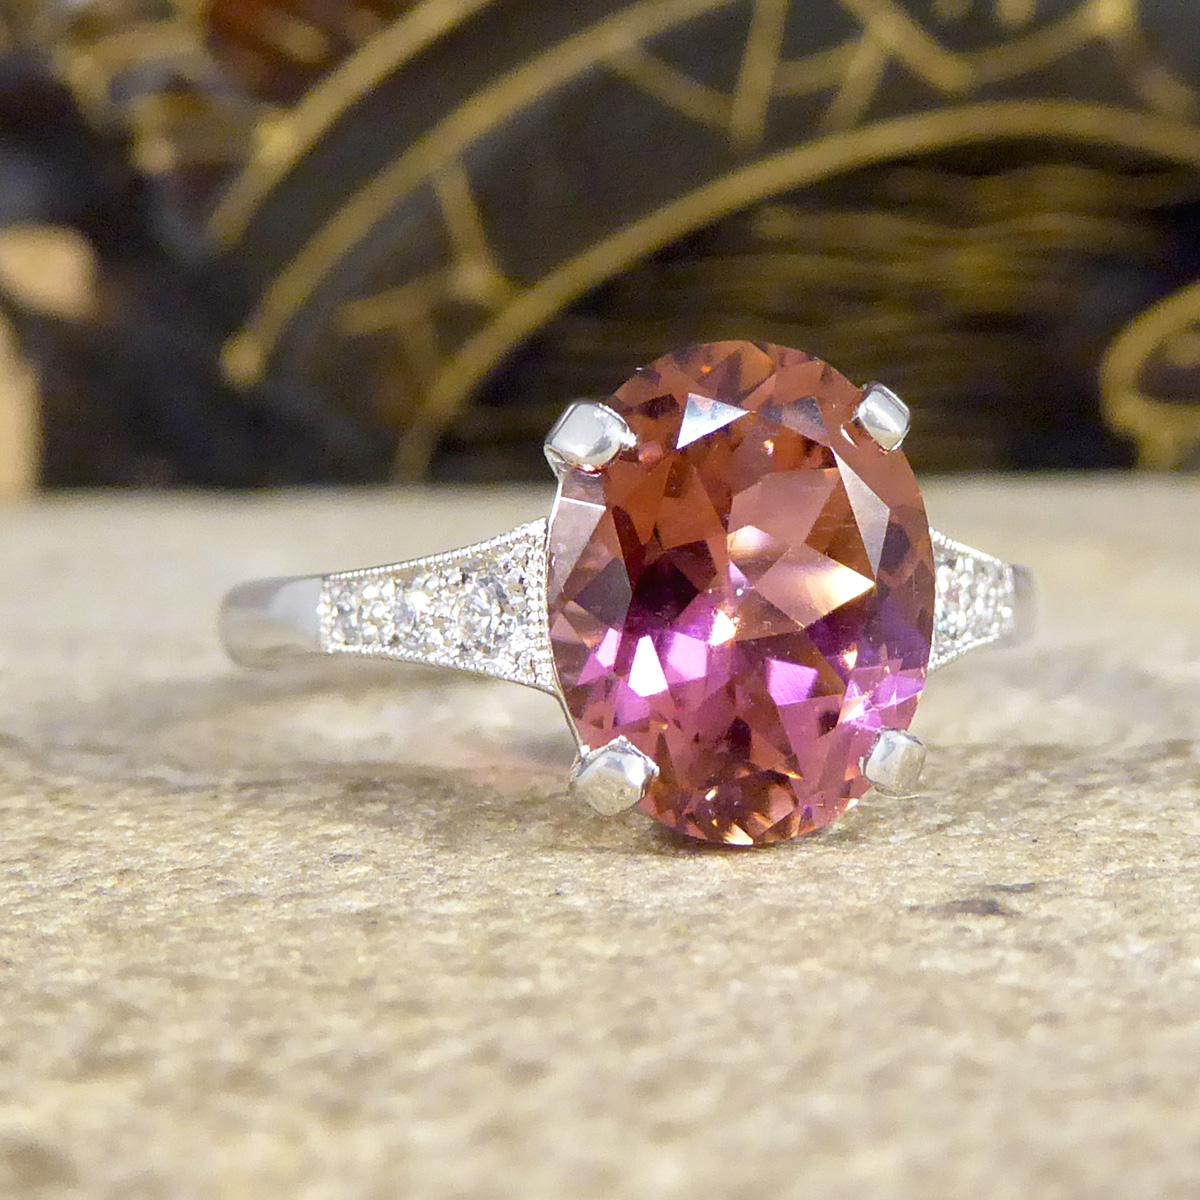 This stunning ring has been hand crafted and is new and never worn. It has been designed and carefully crafted to resemble an Art Deco style ring with bright and vibrant Pink Tourmaline gemstone in the centre weighing 2.38ct. On either side of the